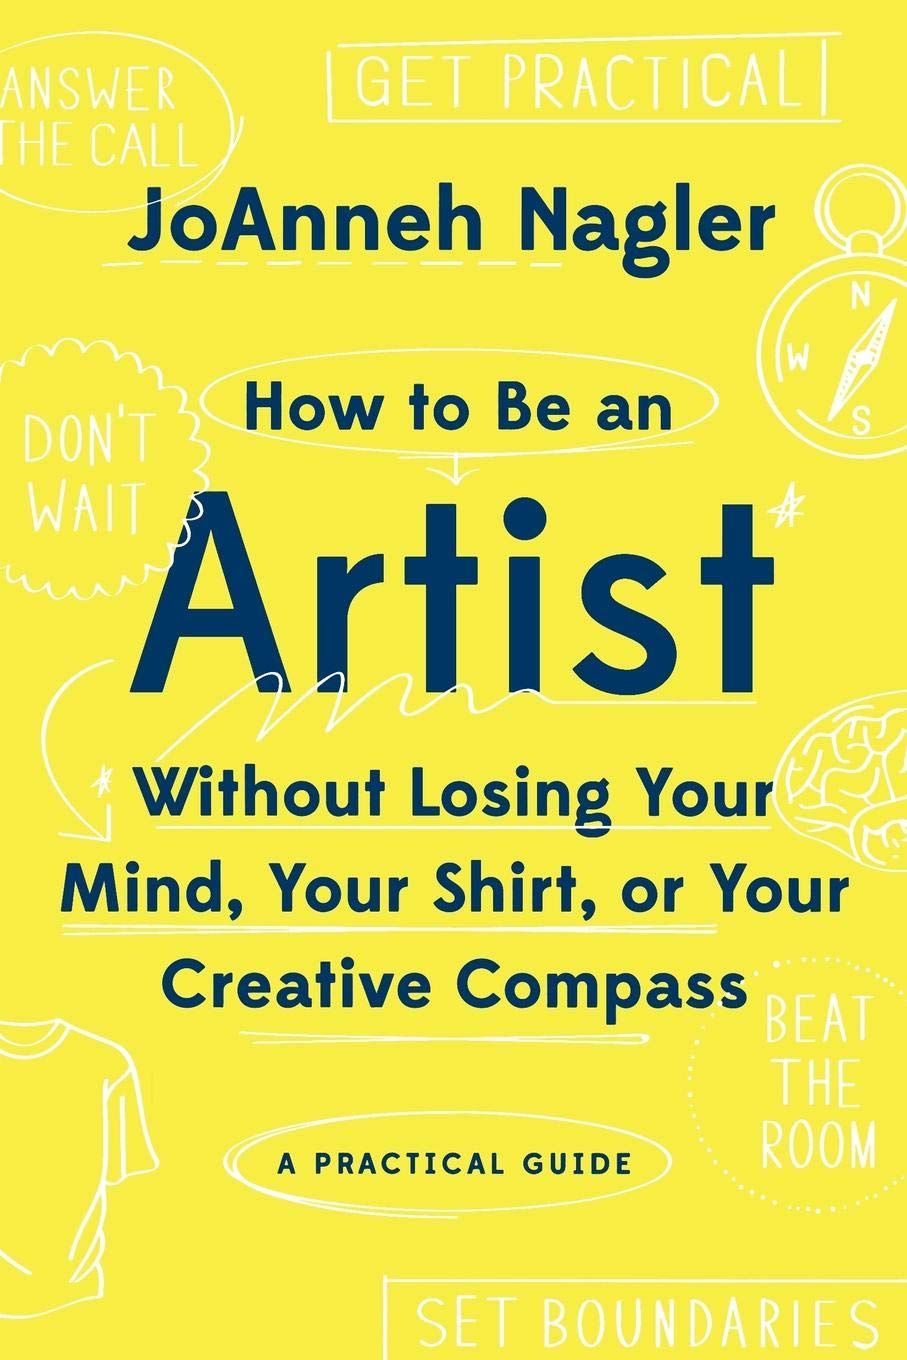 How to Be an Artist Without Losing Your Mind, Your Shirt, or Your Creative Compass: A Practical Guide